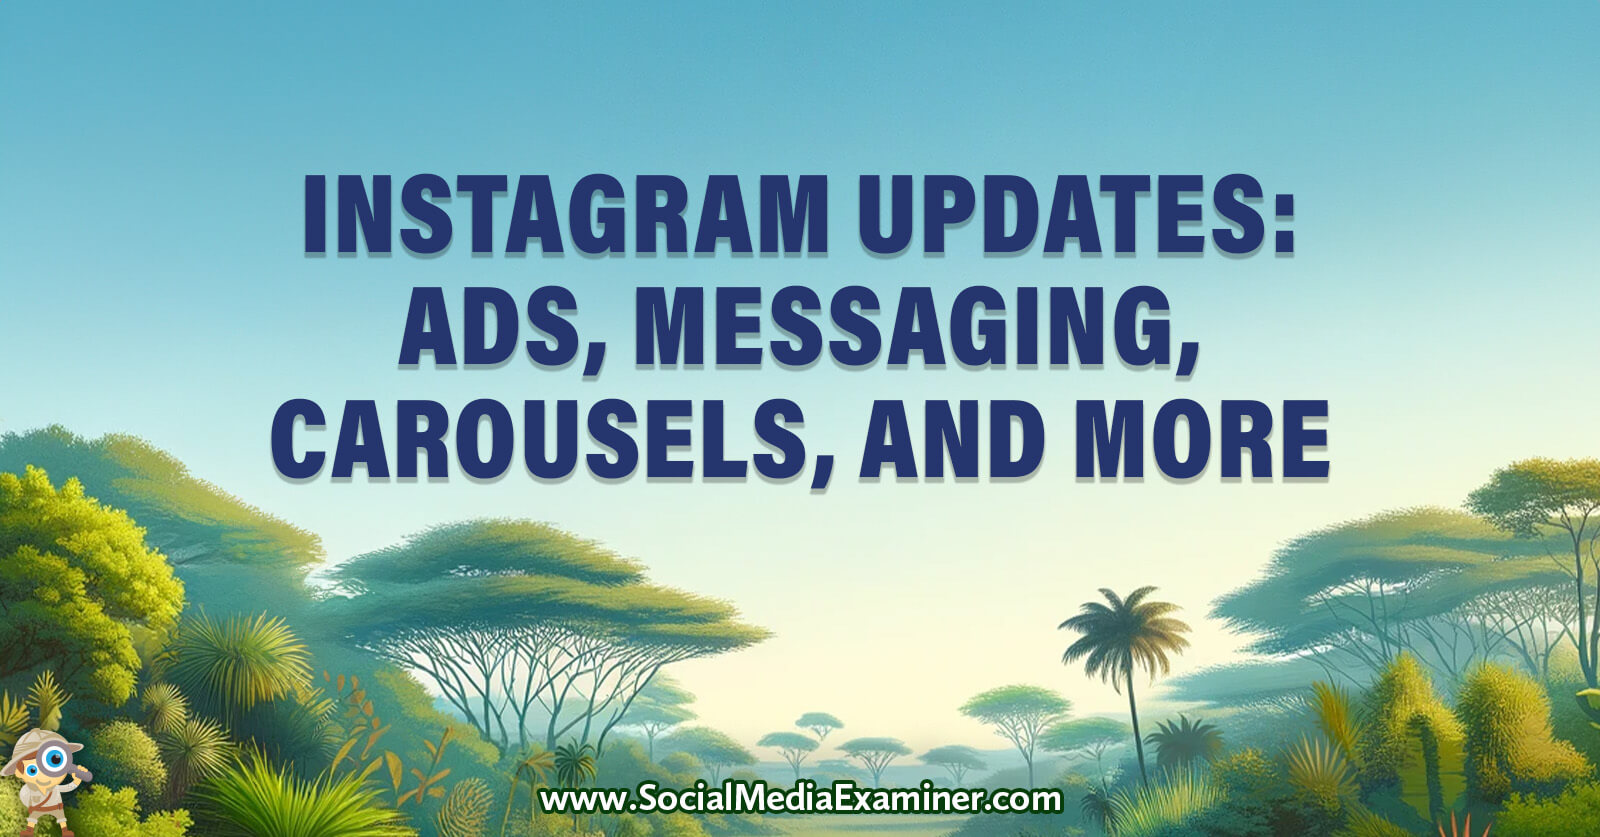 Instagram Updates: Ads, Messaging, Carousels, and More by Social Media Examiner